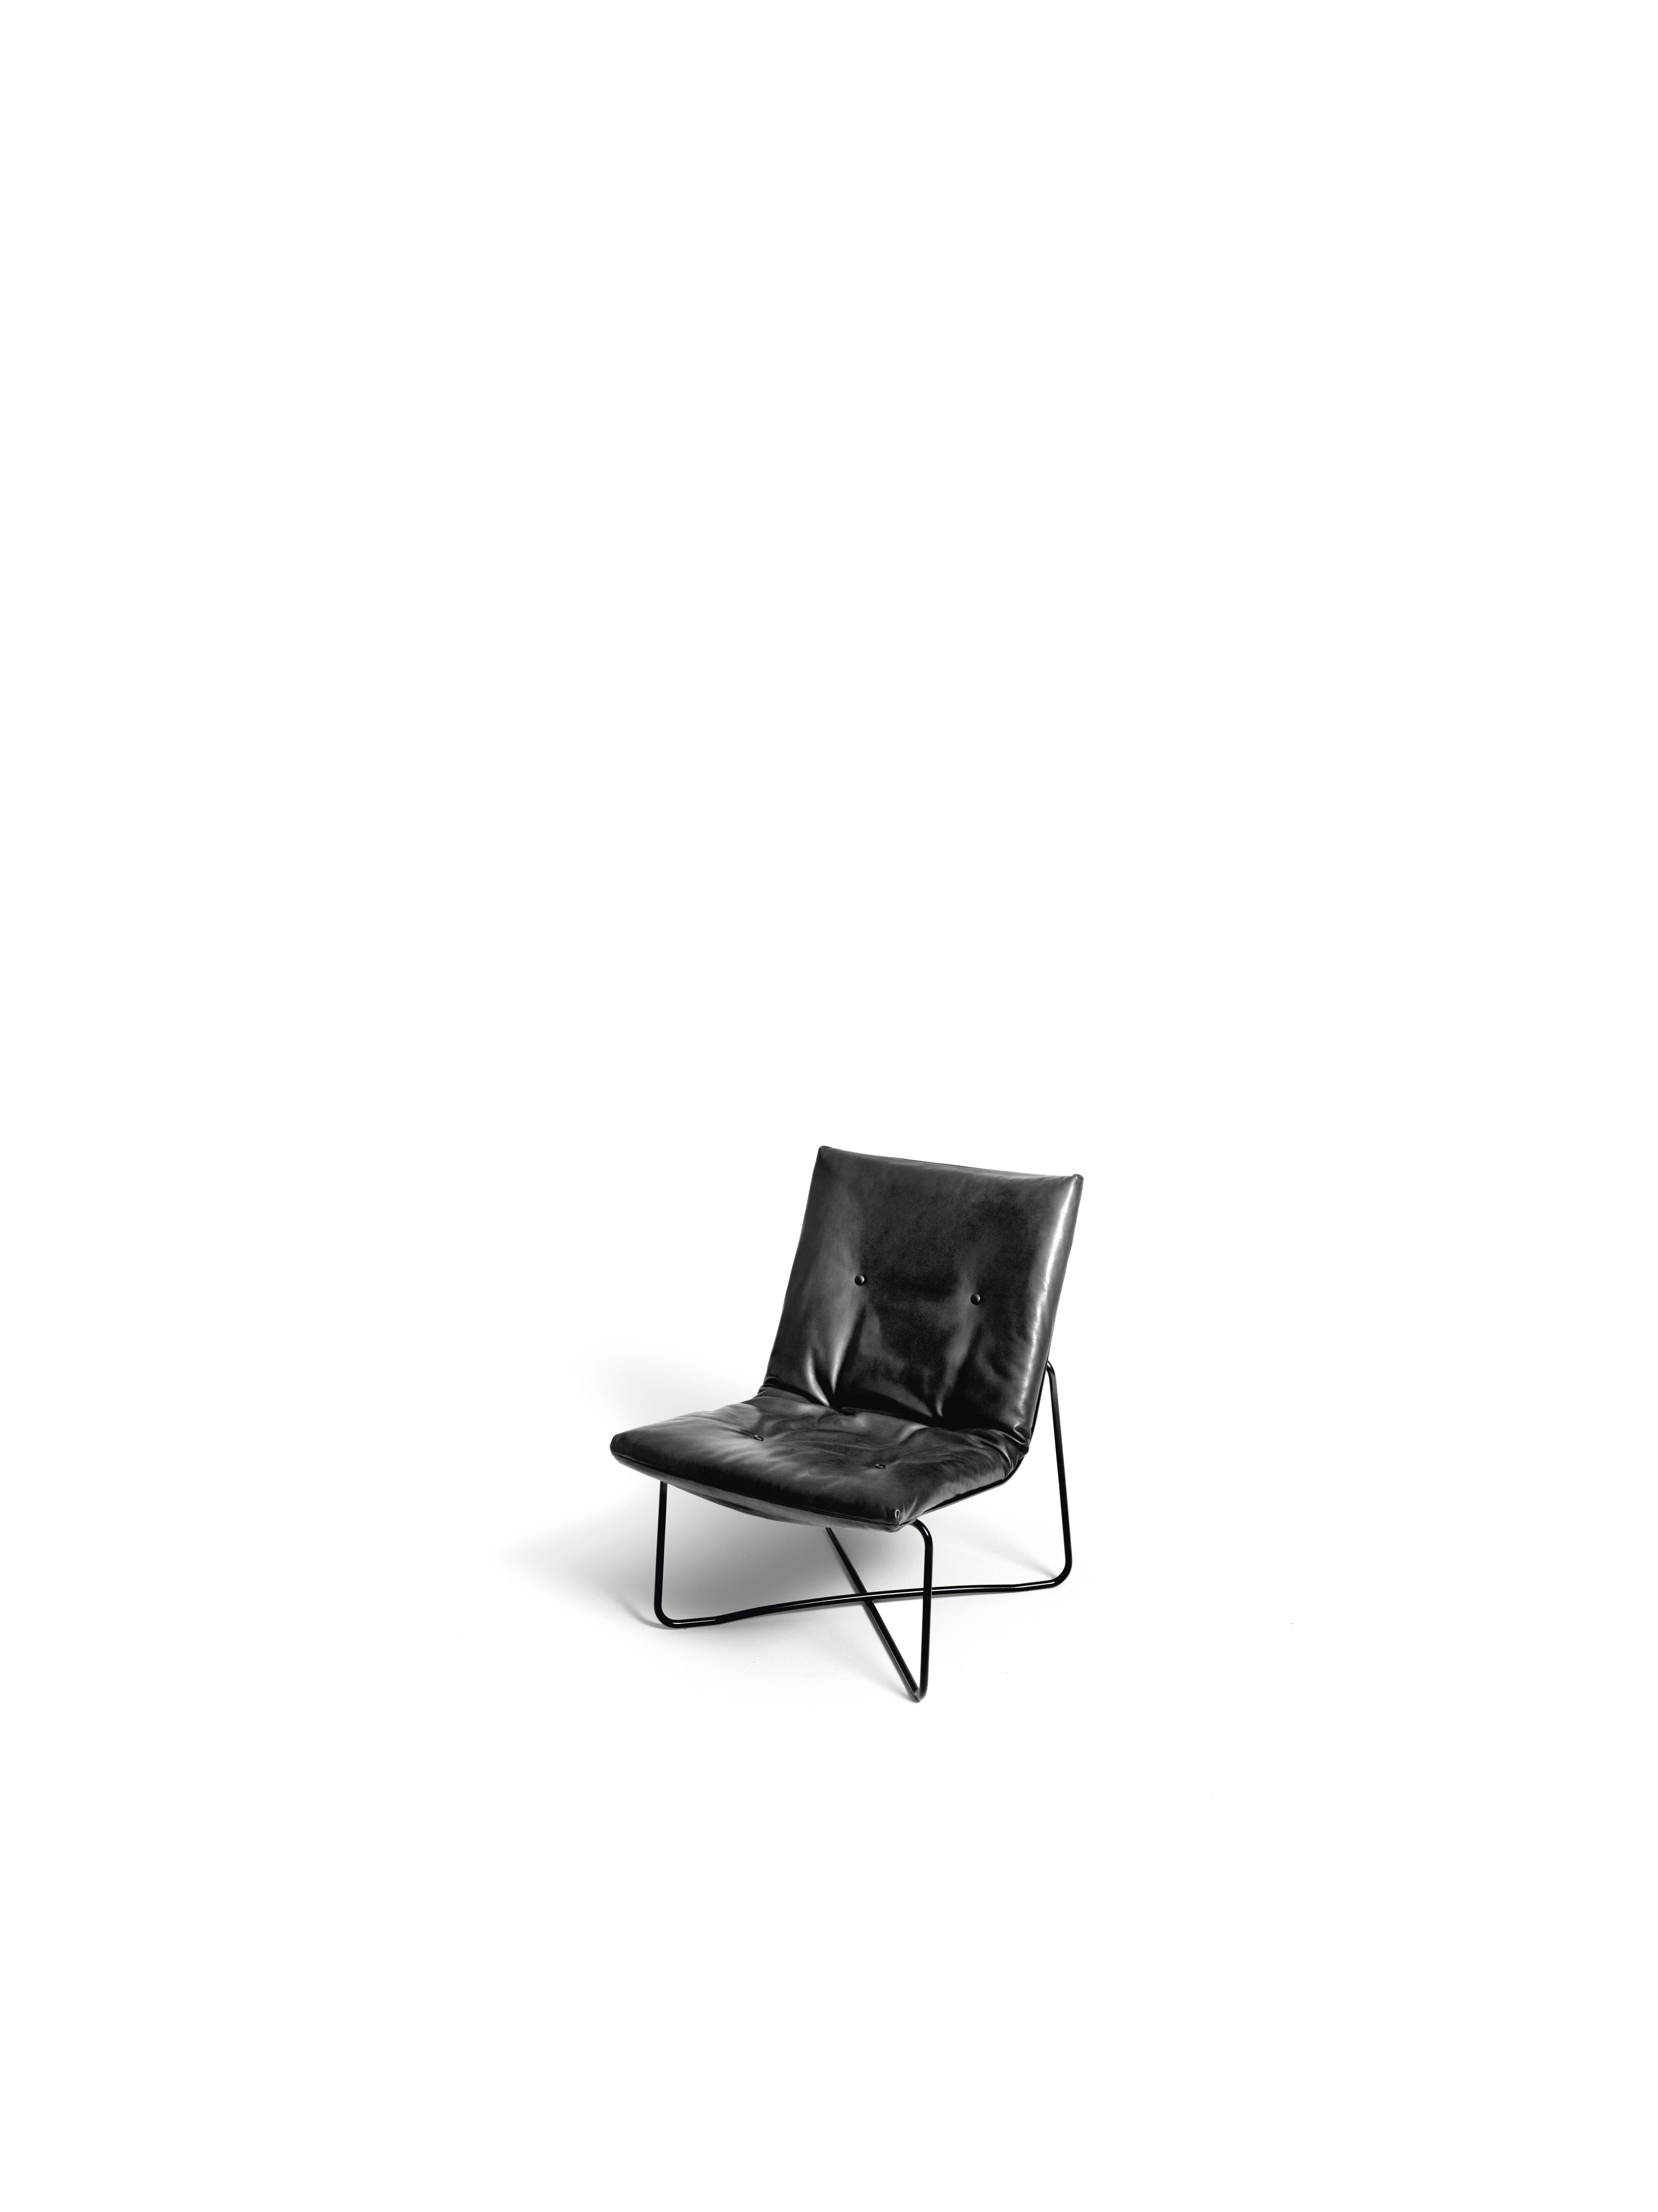 This chair by Maarten Van Severen and Fabian Schwaerzler has a classic design that is able to create strong, solid, absolute bonds. The structure is composed of a single matte black steel tube with a crisscross motif that emphasizes the extremely